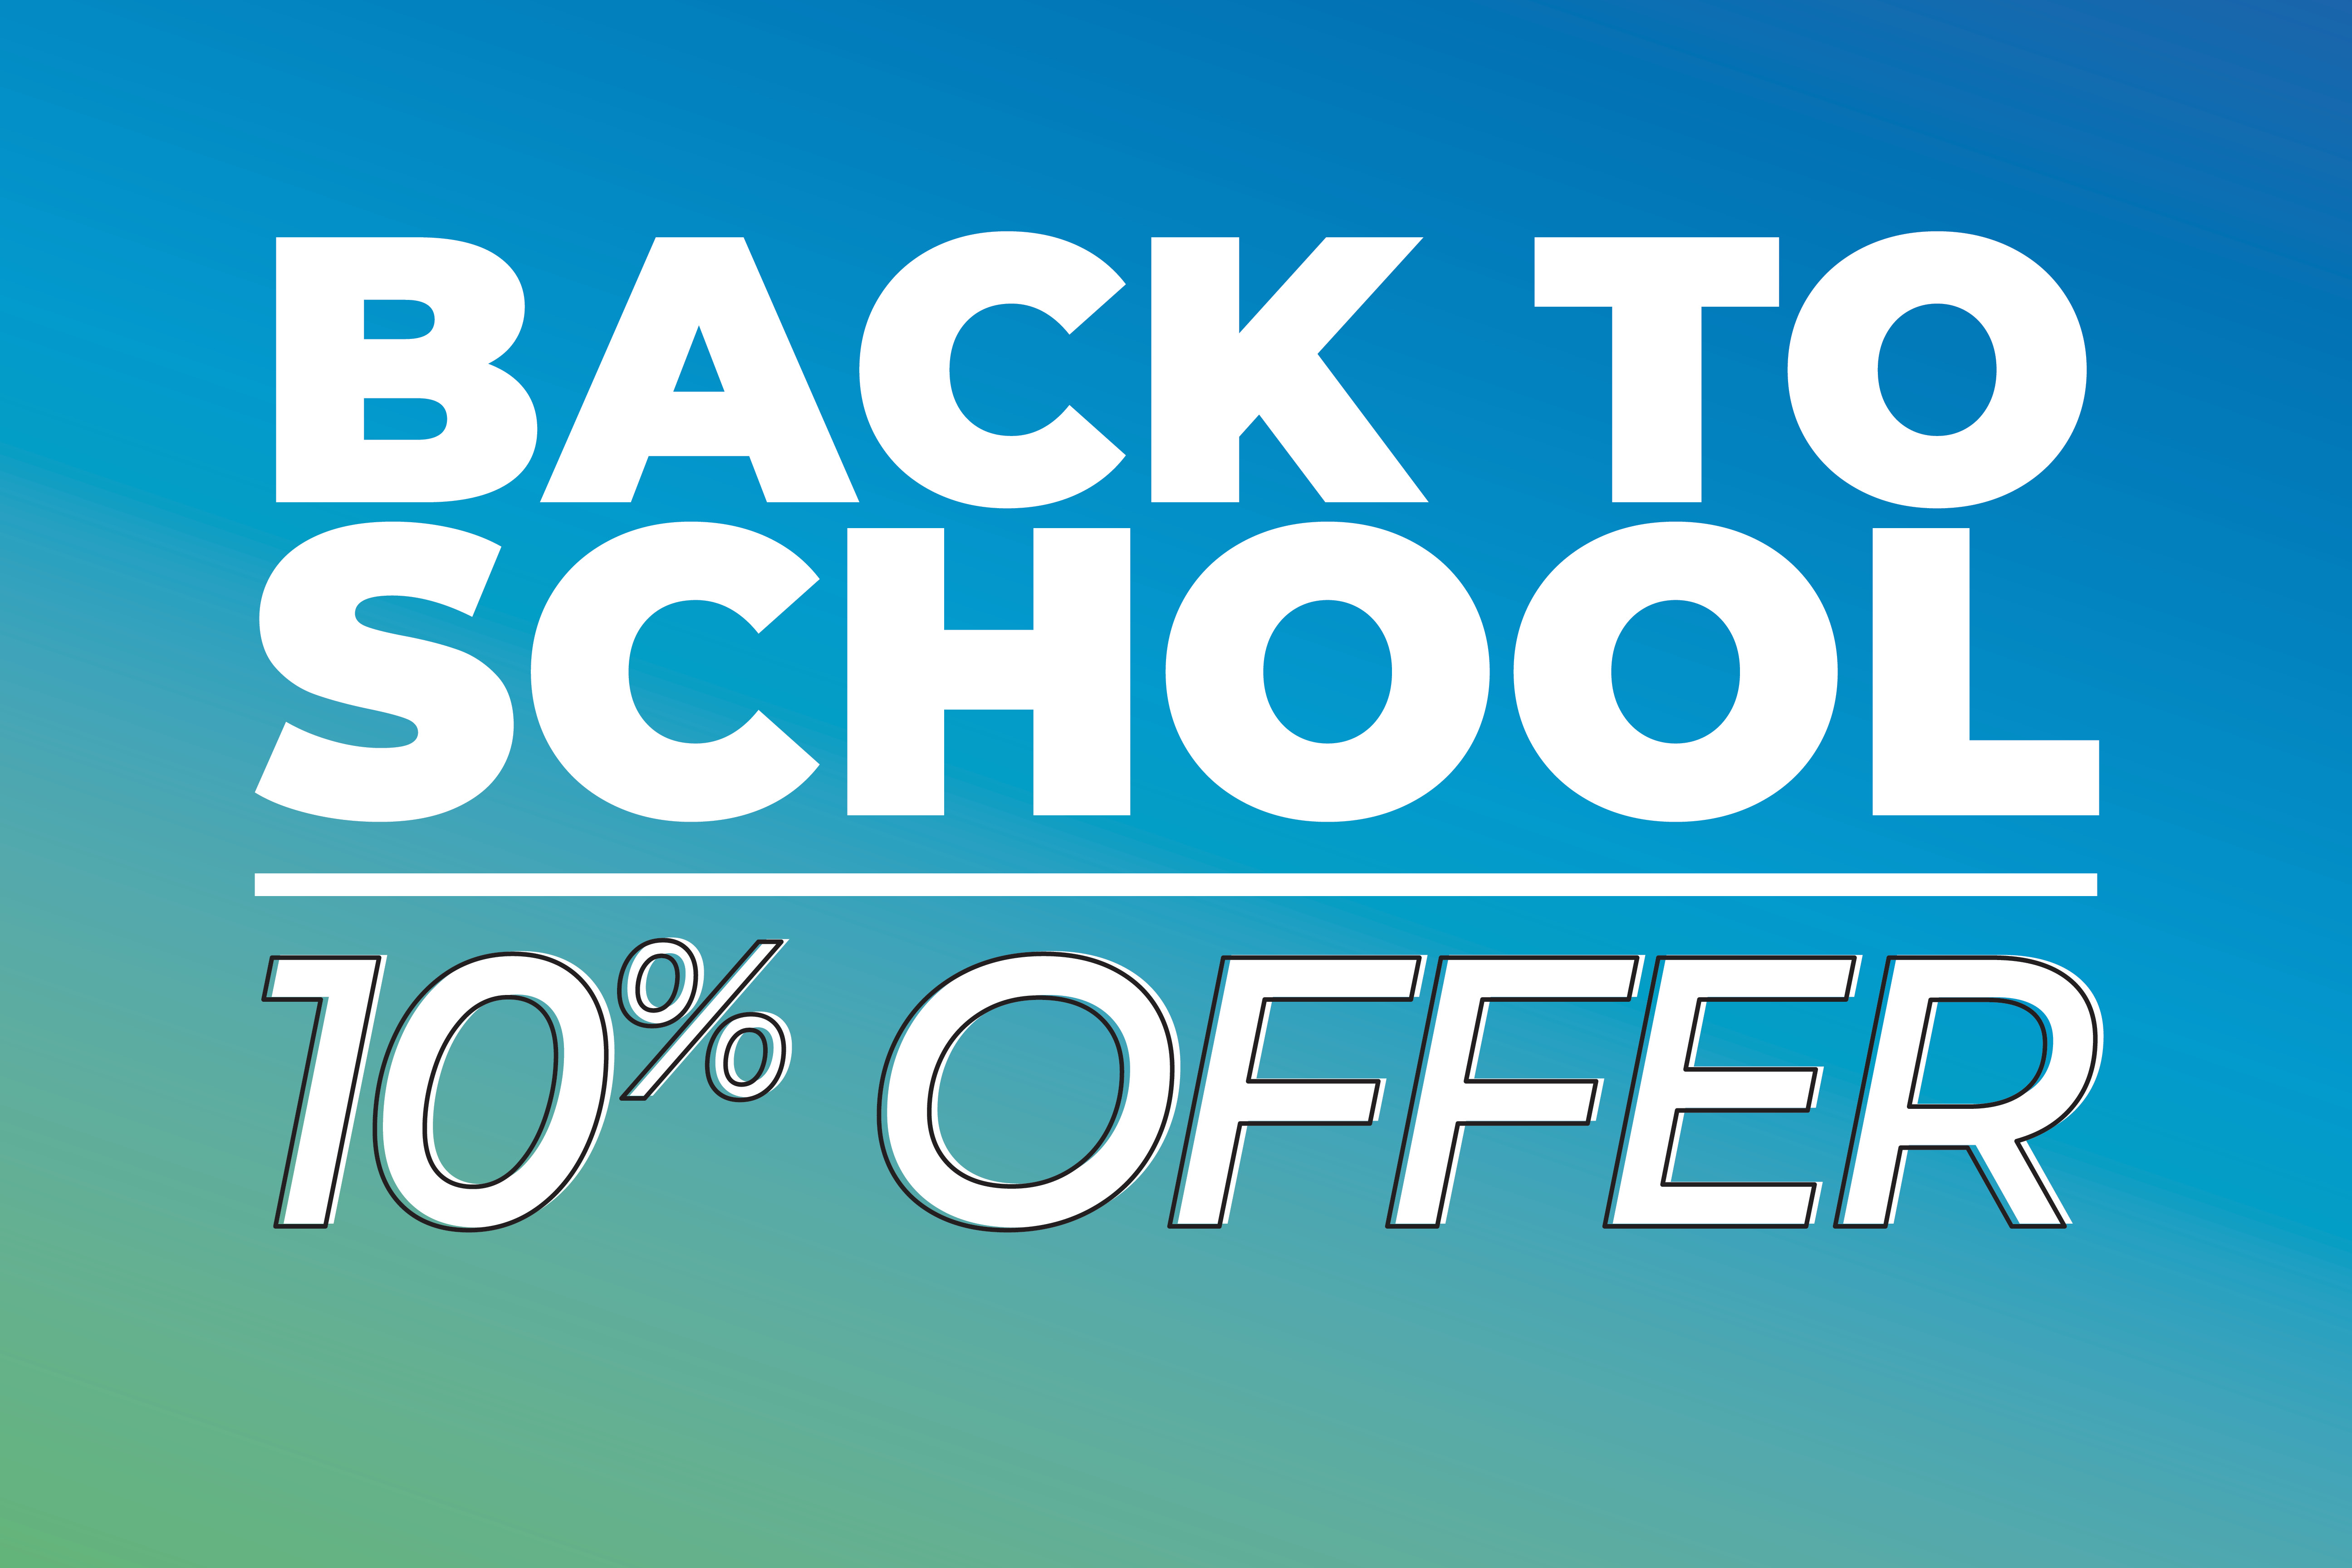 Back to School 10% Offer